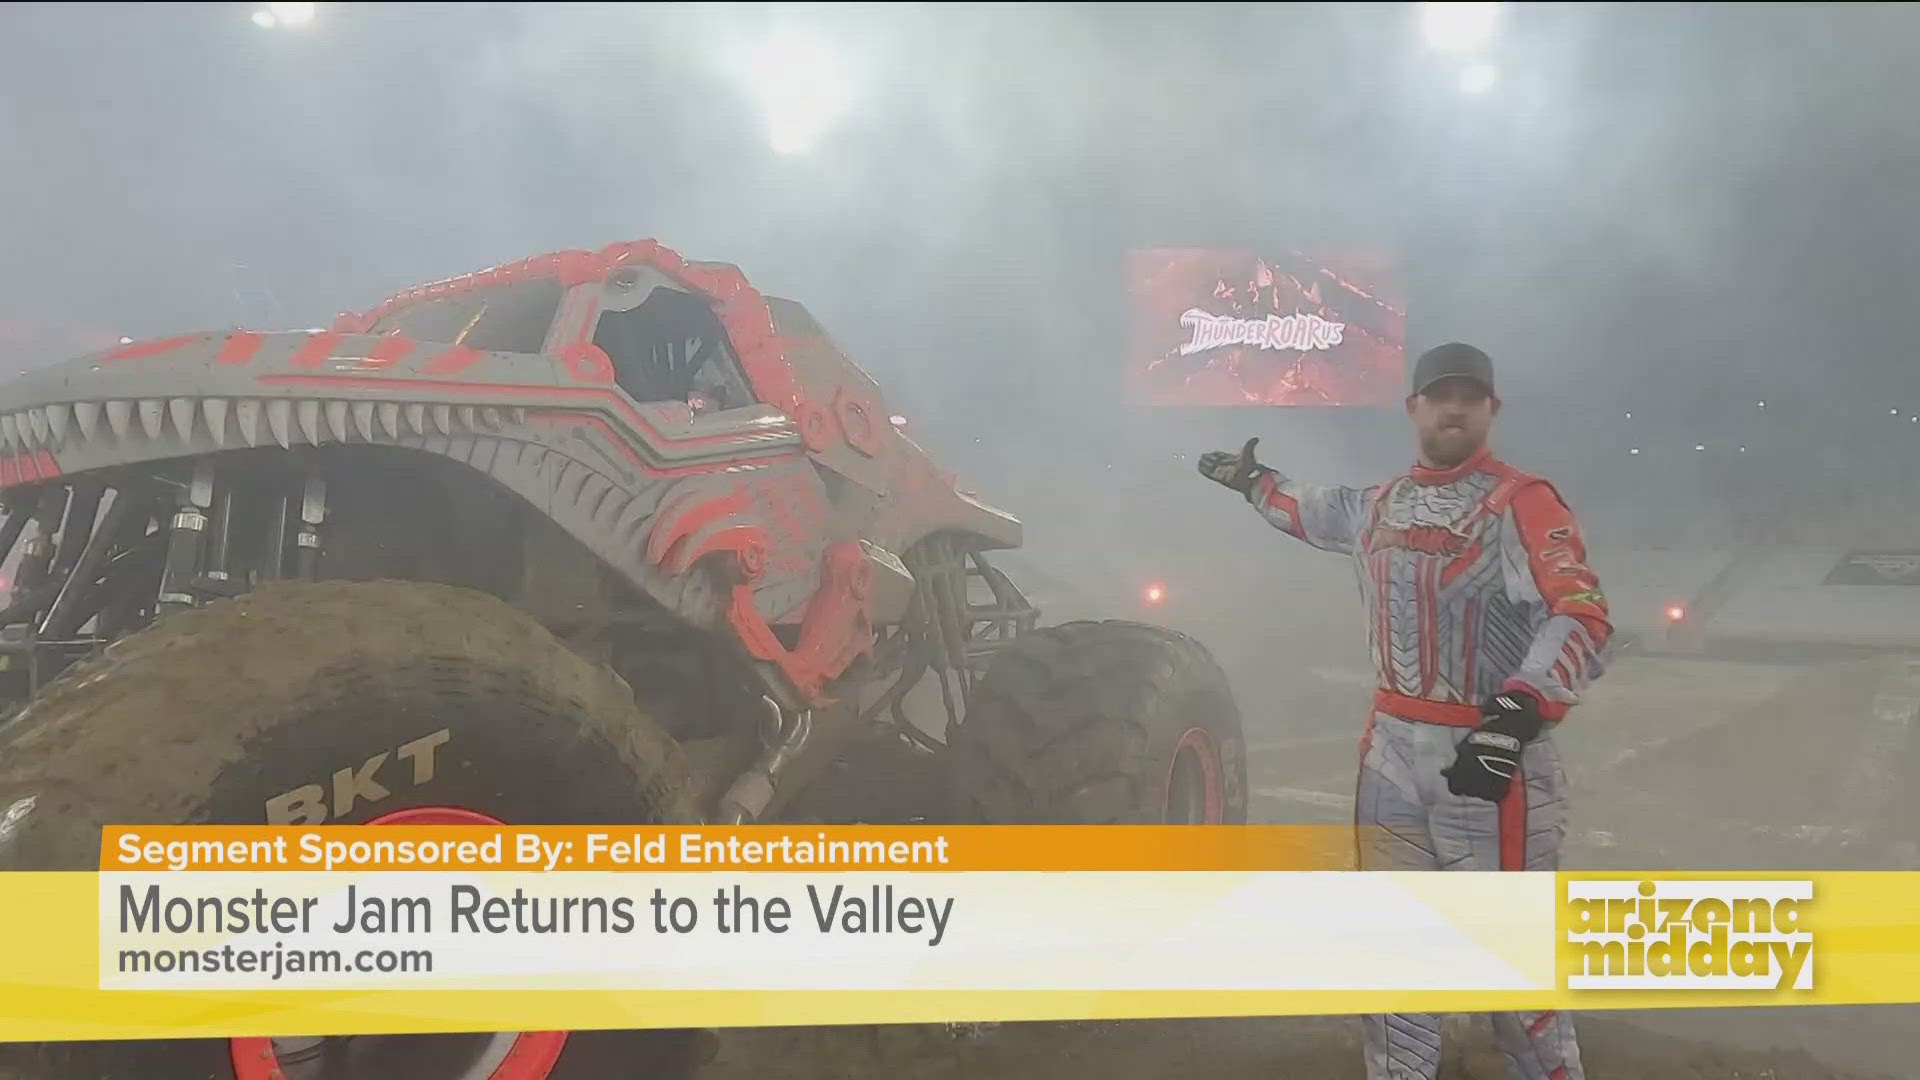 Monster Truck Driver Colt Stephens shares all the roaring details on what fans can expect from Monster Jam coming to Glendale on April 27.